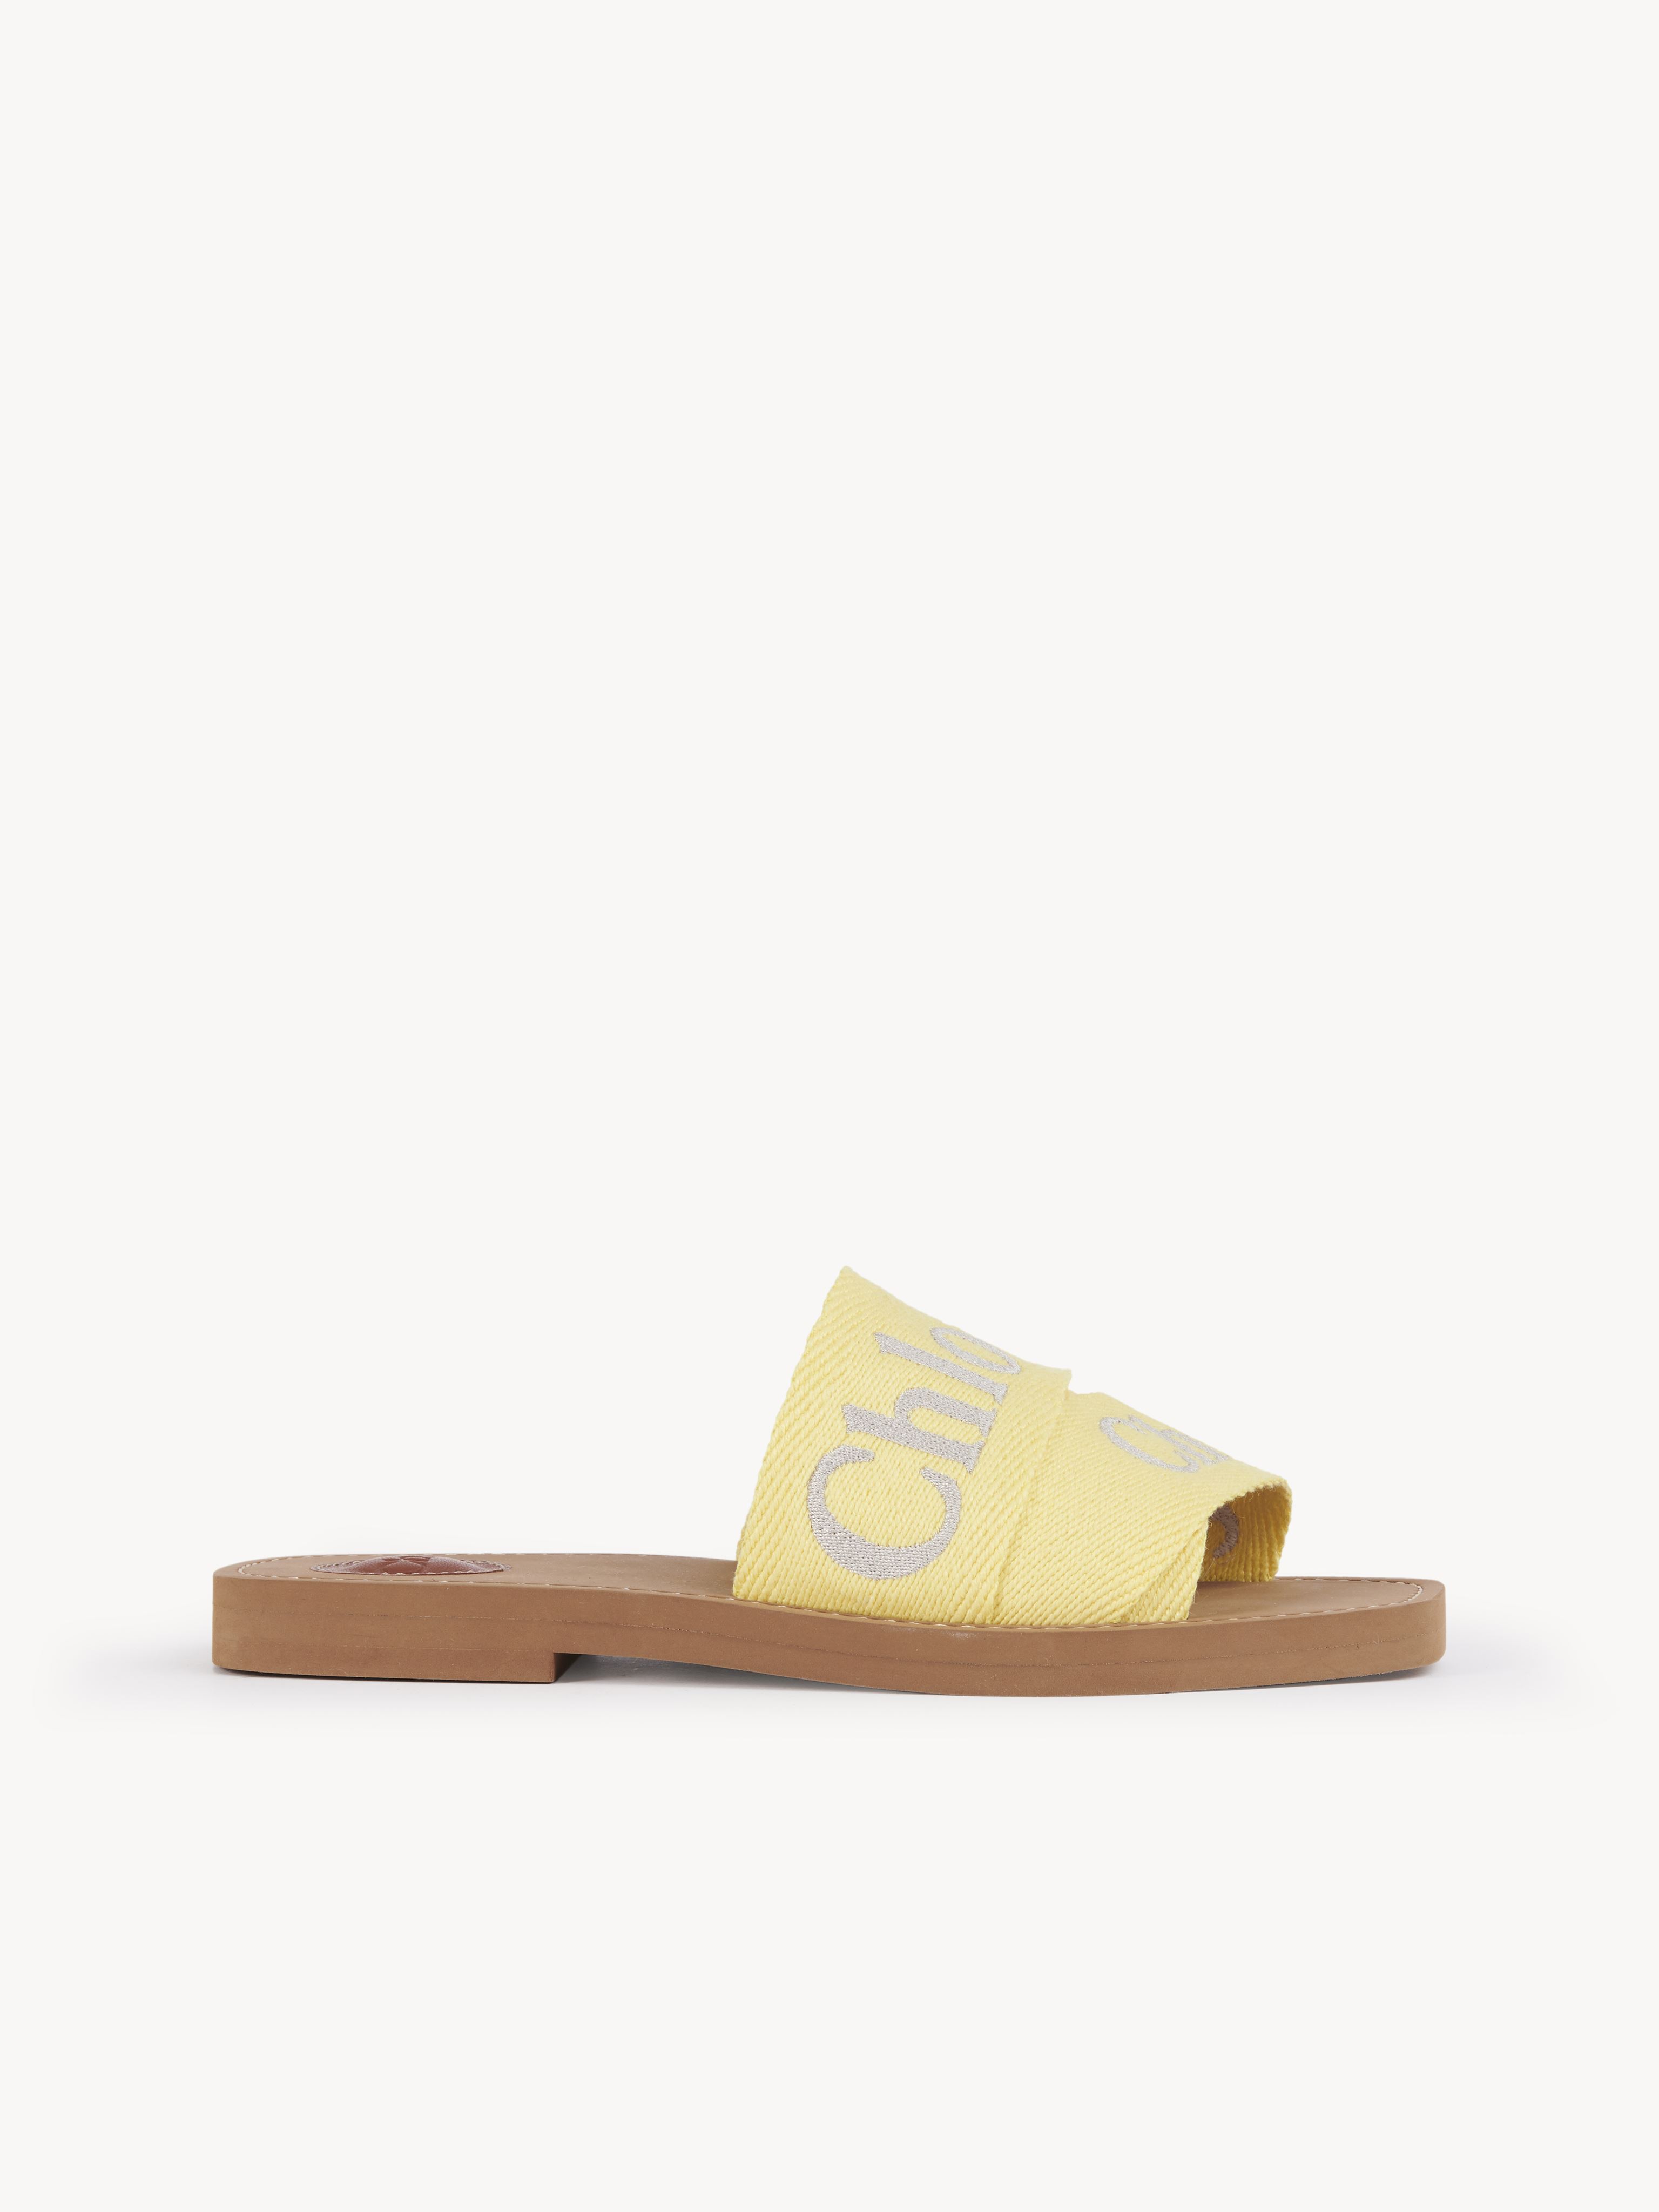 CHLOÉ MULES PLATES WOODY FEMME LAITON DORÉ TAILLE 36 90% LIN, 10% POLYESTER